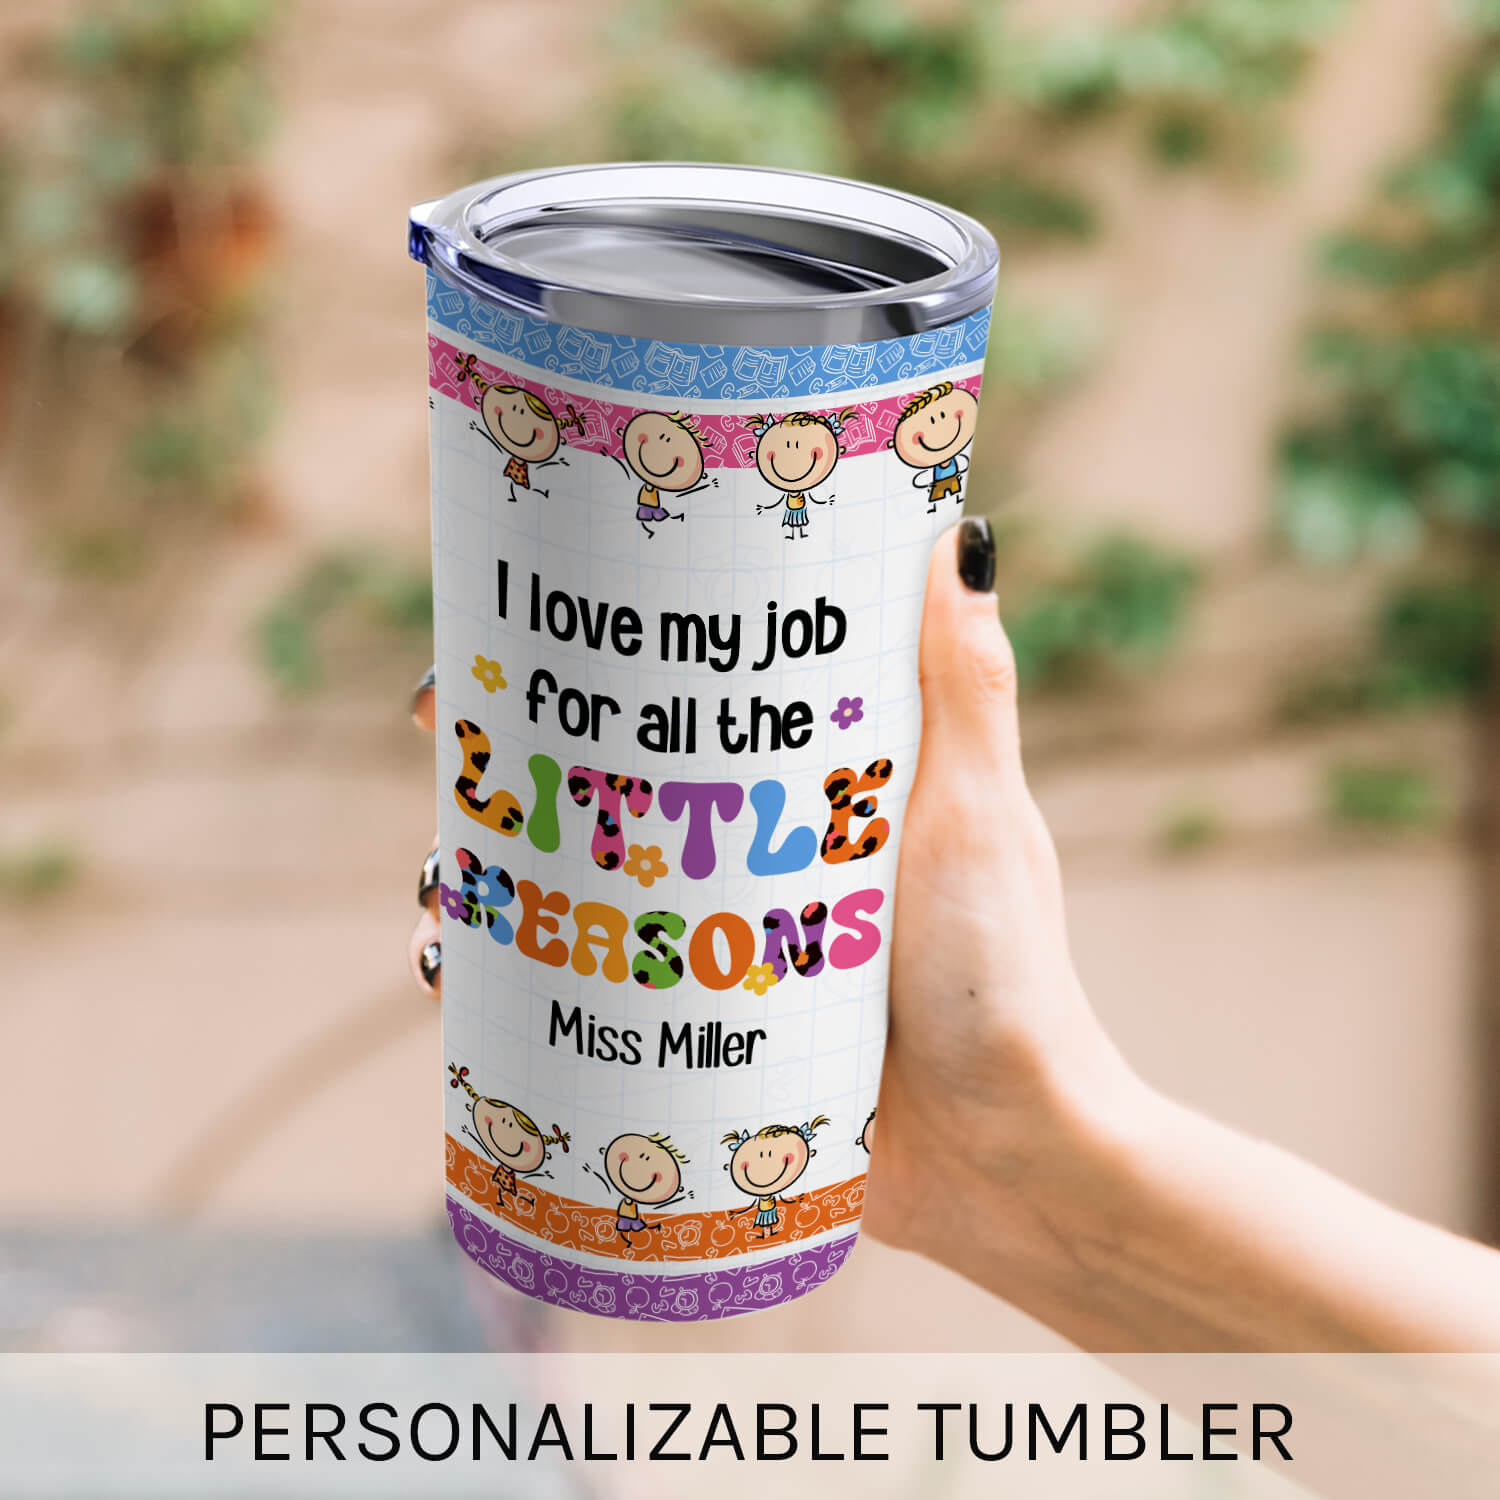 I Love My Job For All The Little Reasons - Personalized Teacher's Day, Birthday or Christmas gift For Teacher or Daycare Teacher - Custom Tumbler - MyMindfulGifts